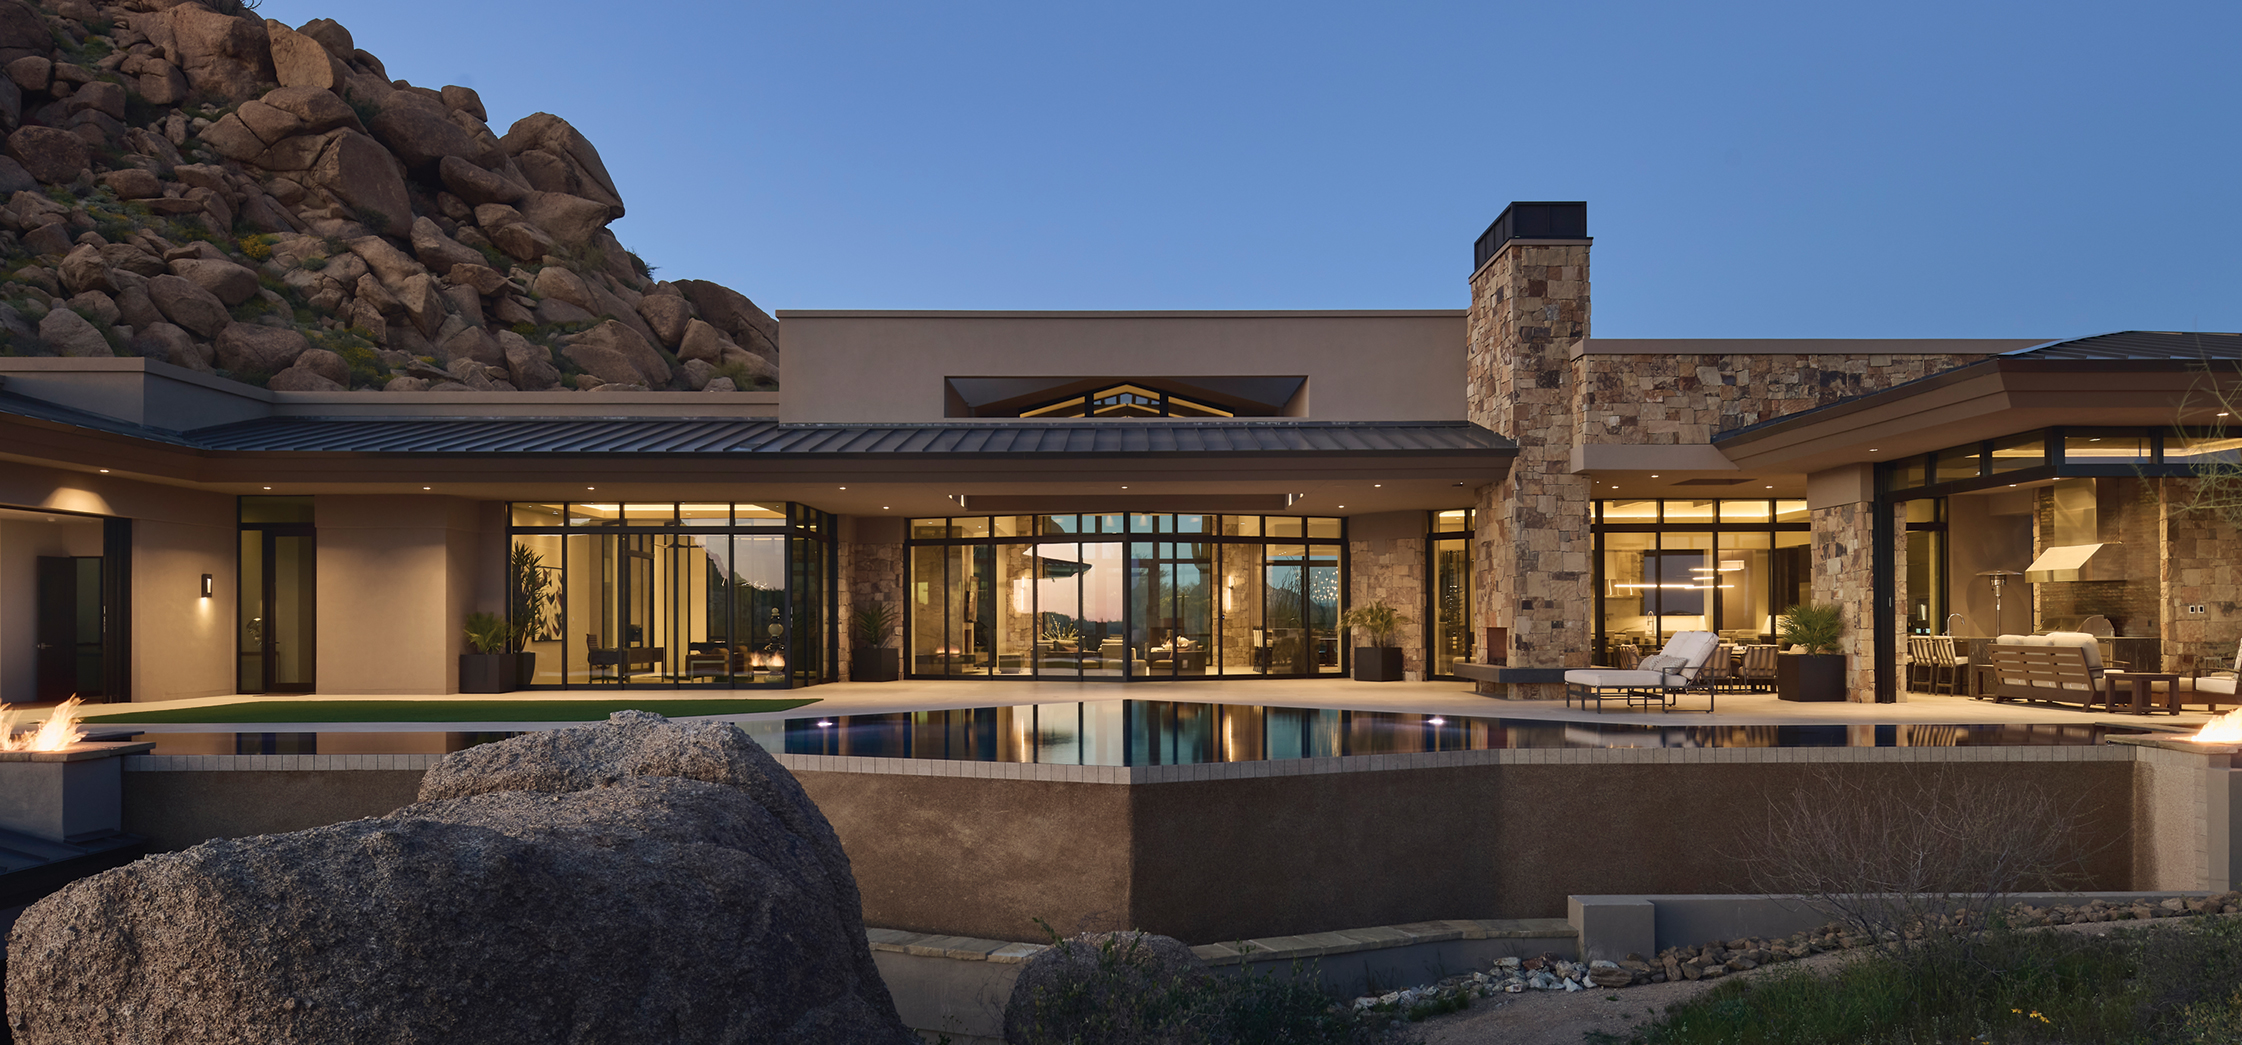 Exterior view of a modern Scottsdale foothills home surrounded by rocky terrain.